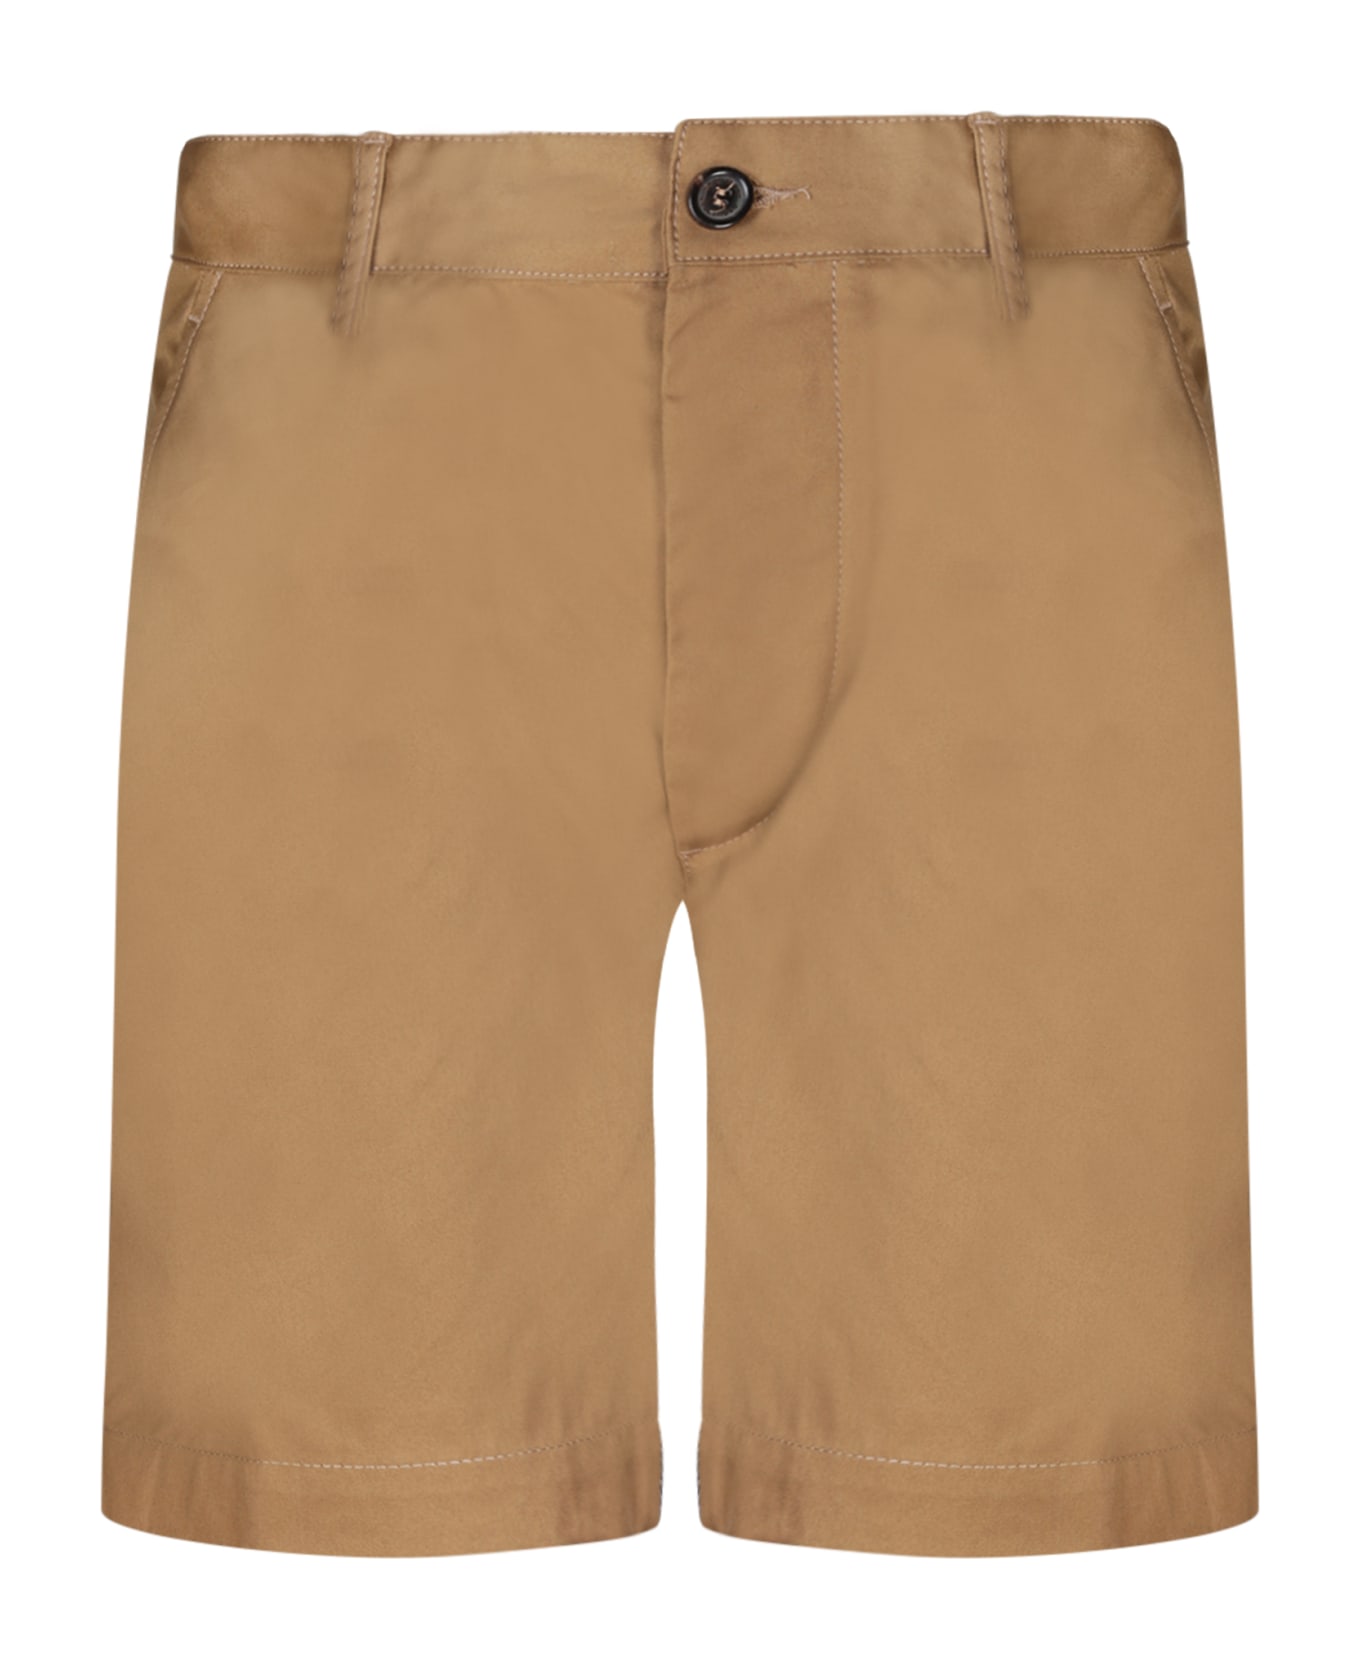 Dsquared2 Caten Bros Shorts - Brown